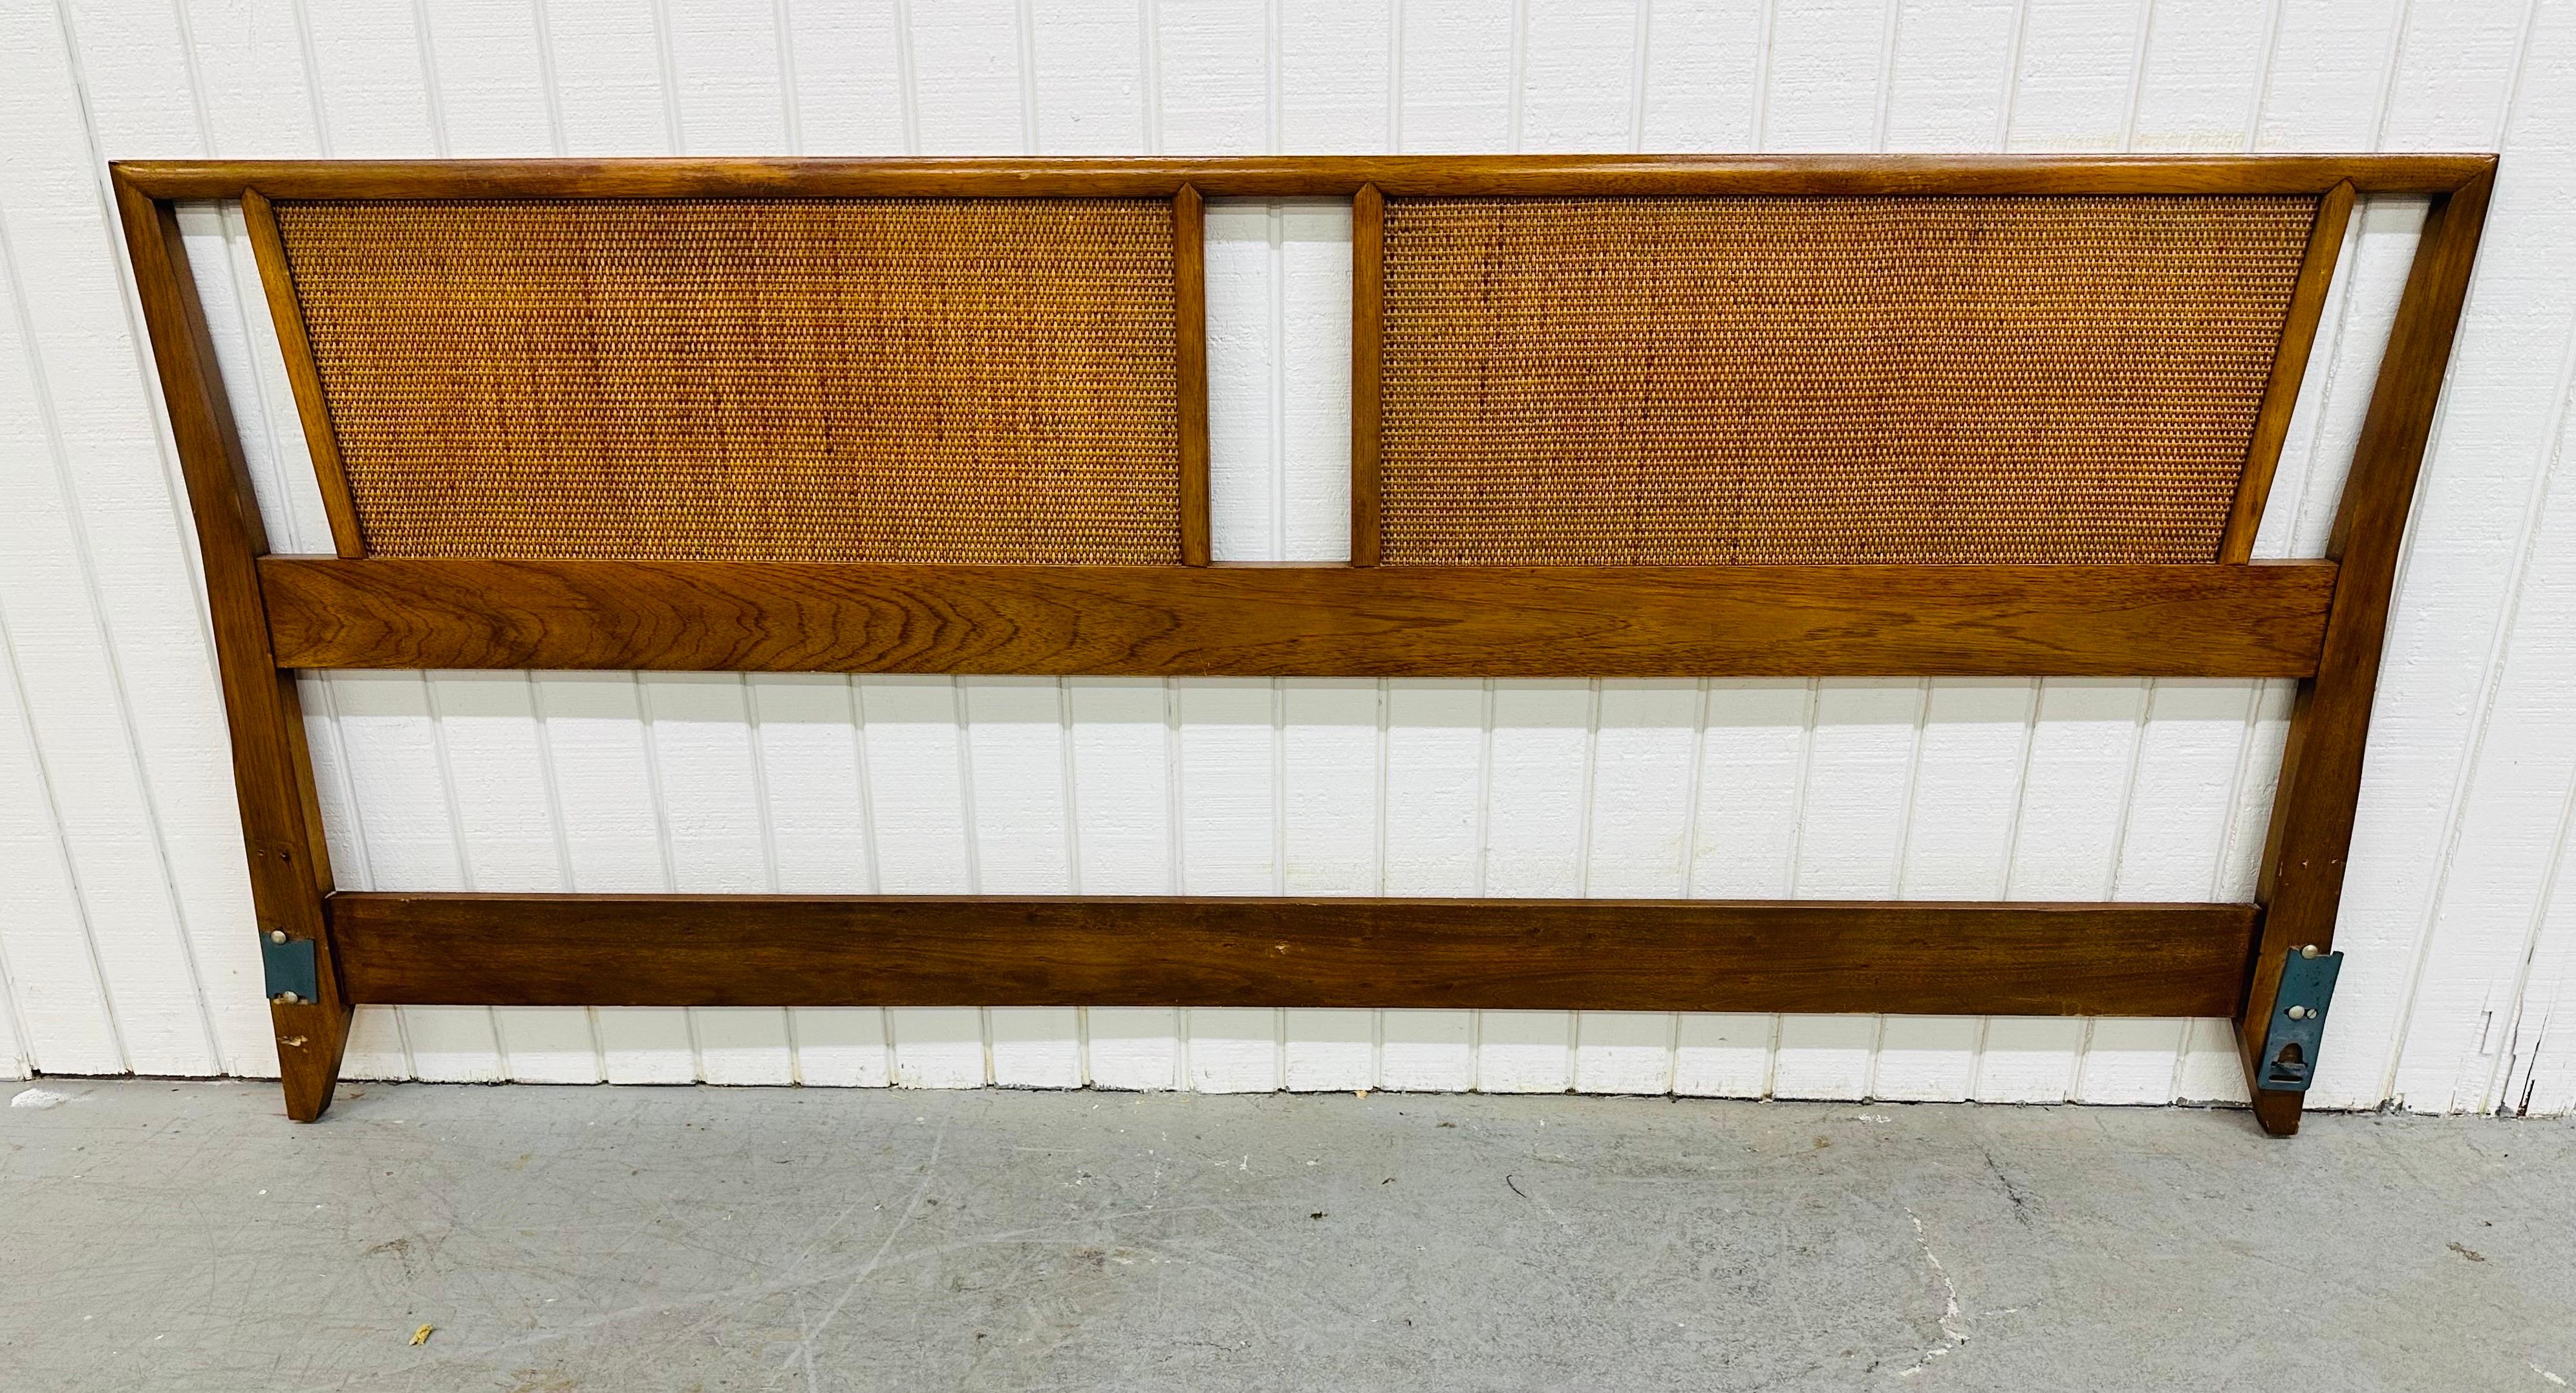 This listing is for a Mid-Century Modern Century King Headboard. Featuring a straight line design, made up of solid wood with cane over top, and a beautiful walnut finish. This is an exceptional combination of quality and design by Century!